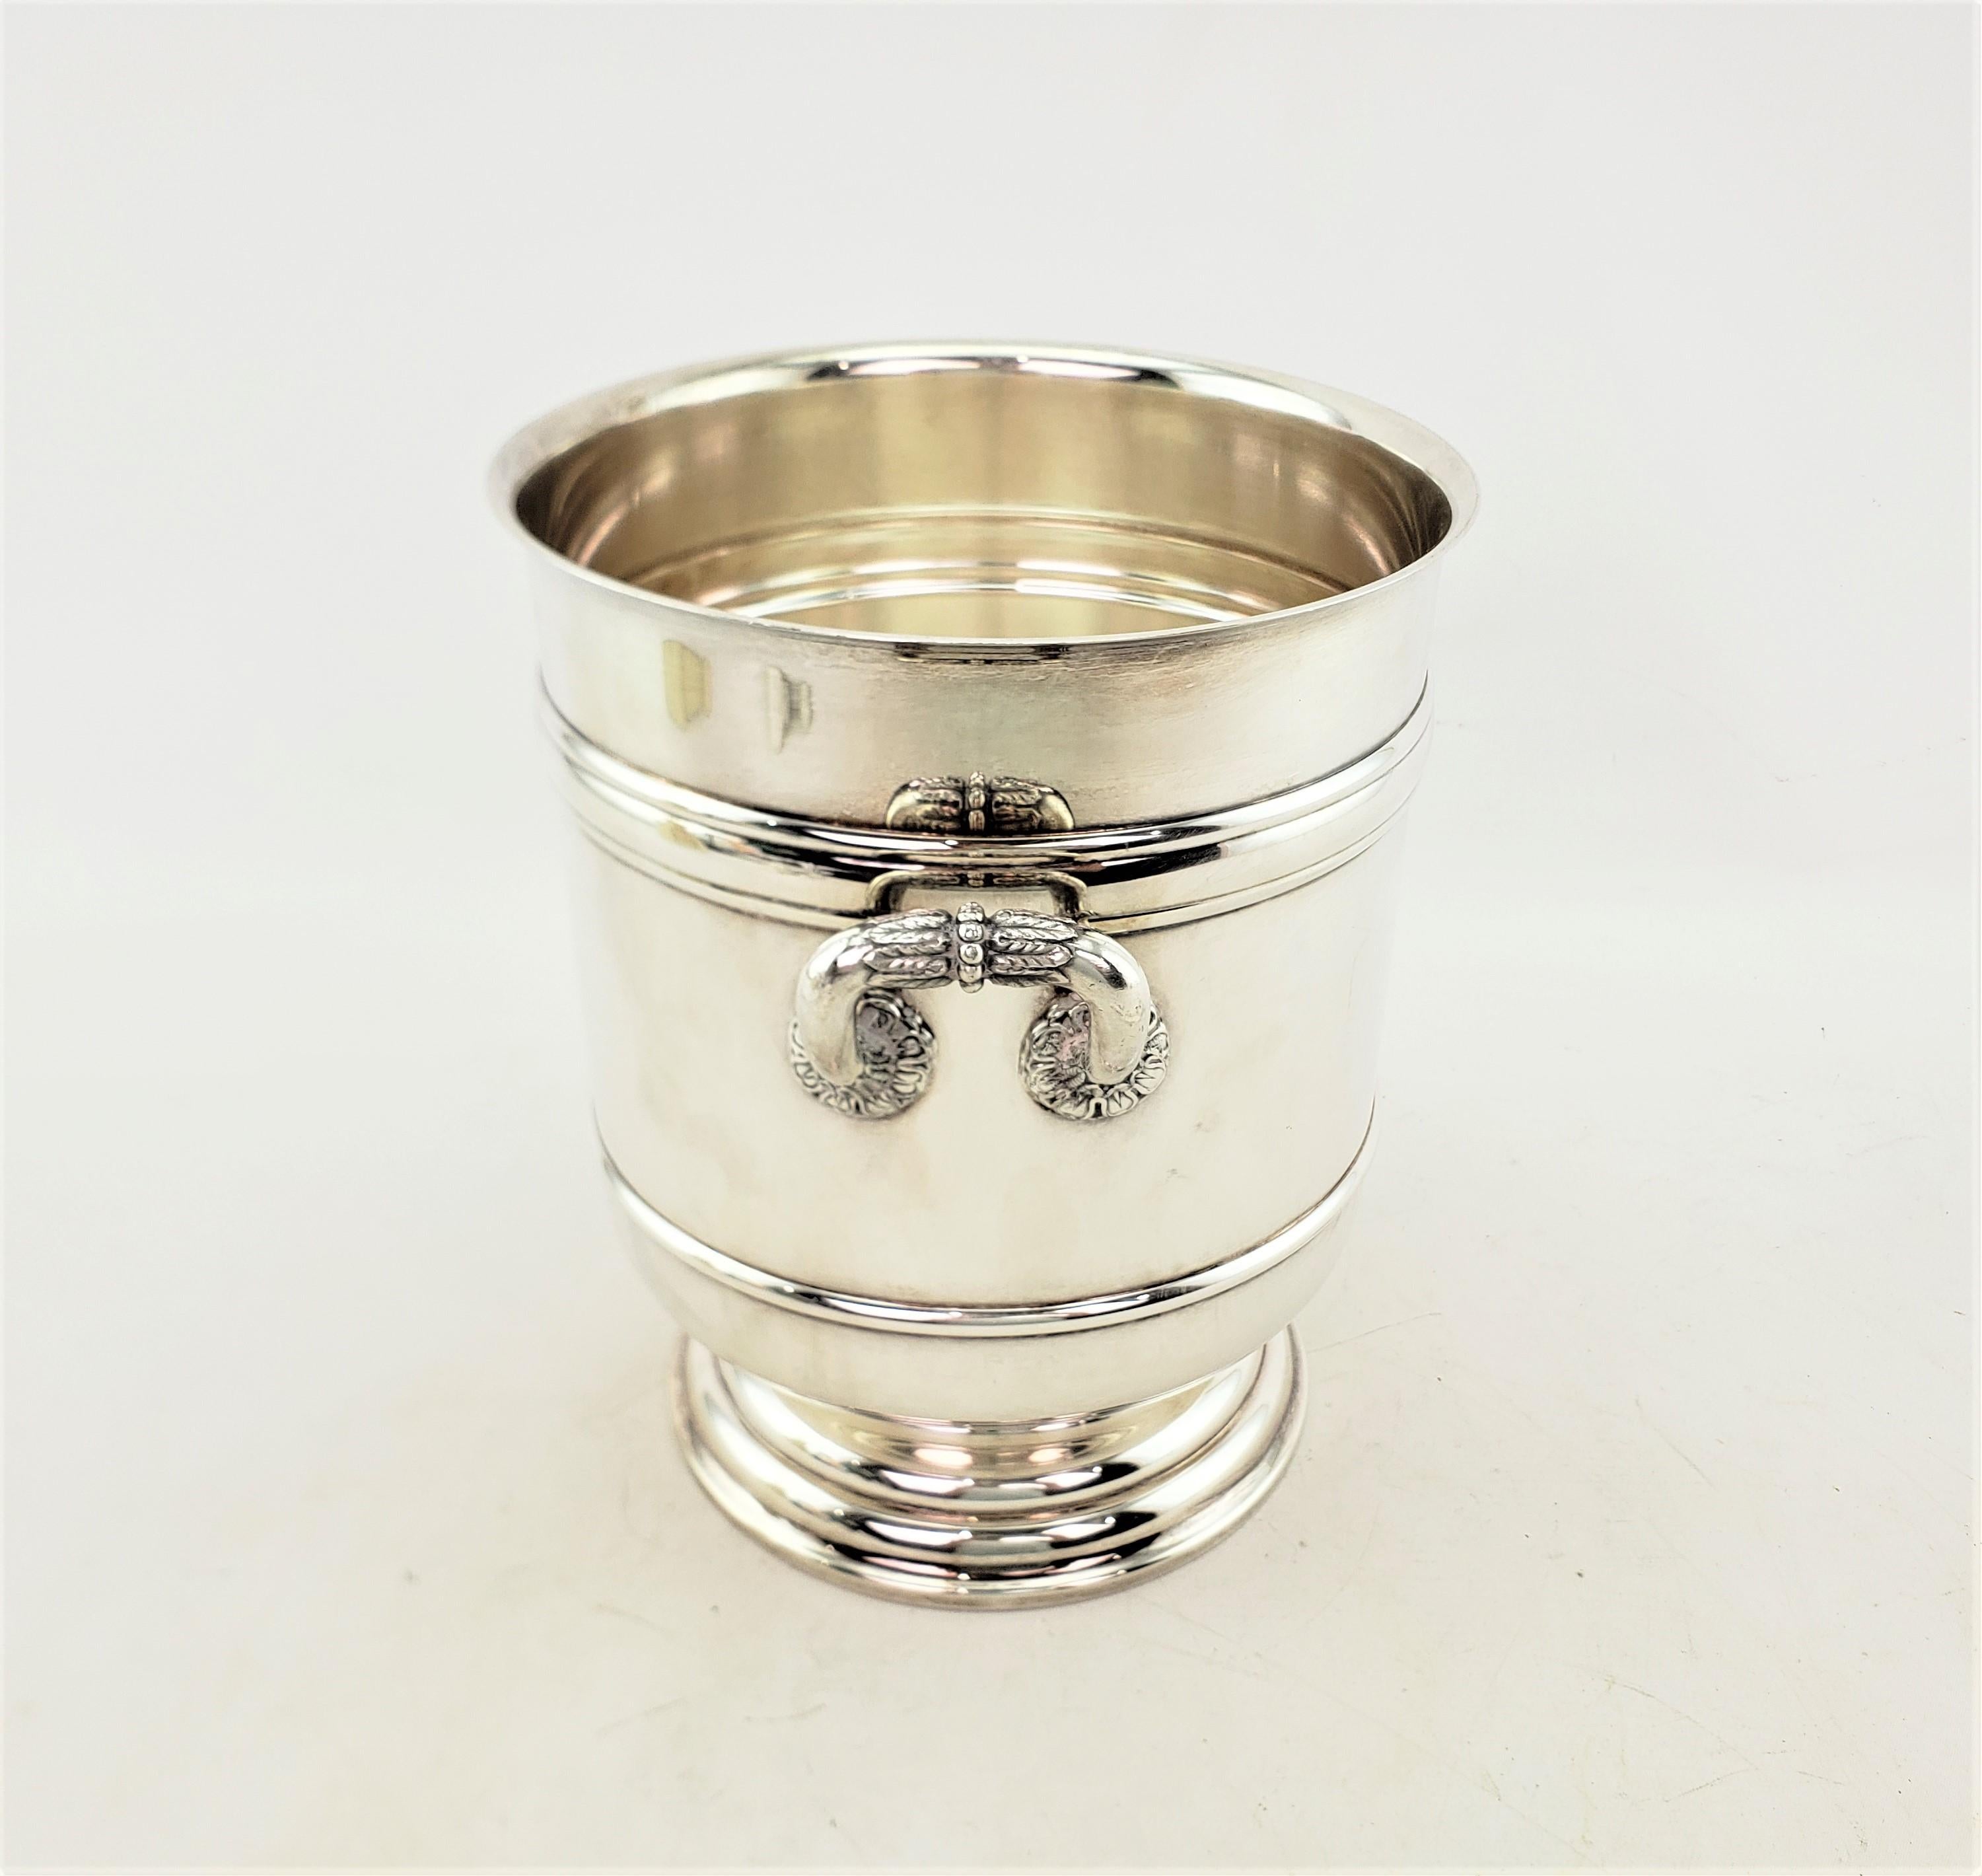 Mid-Century Era Christofle Silver Plated Ice Bucket or Bottle Chiller For Sale 1